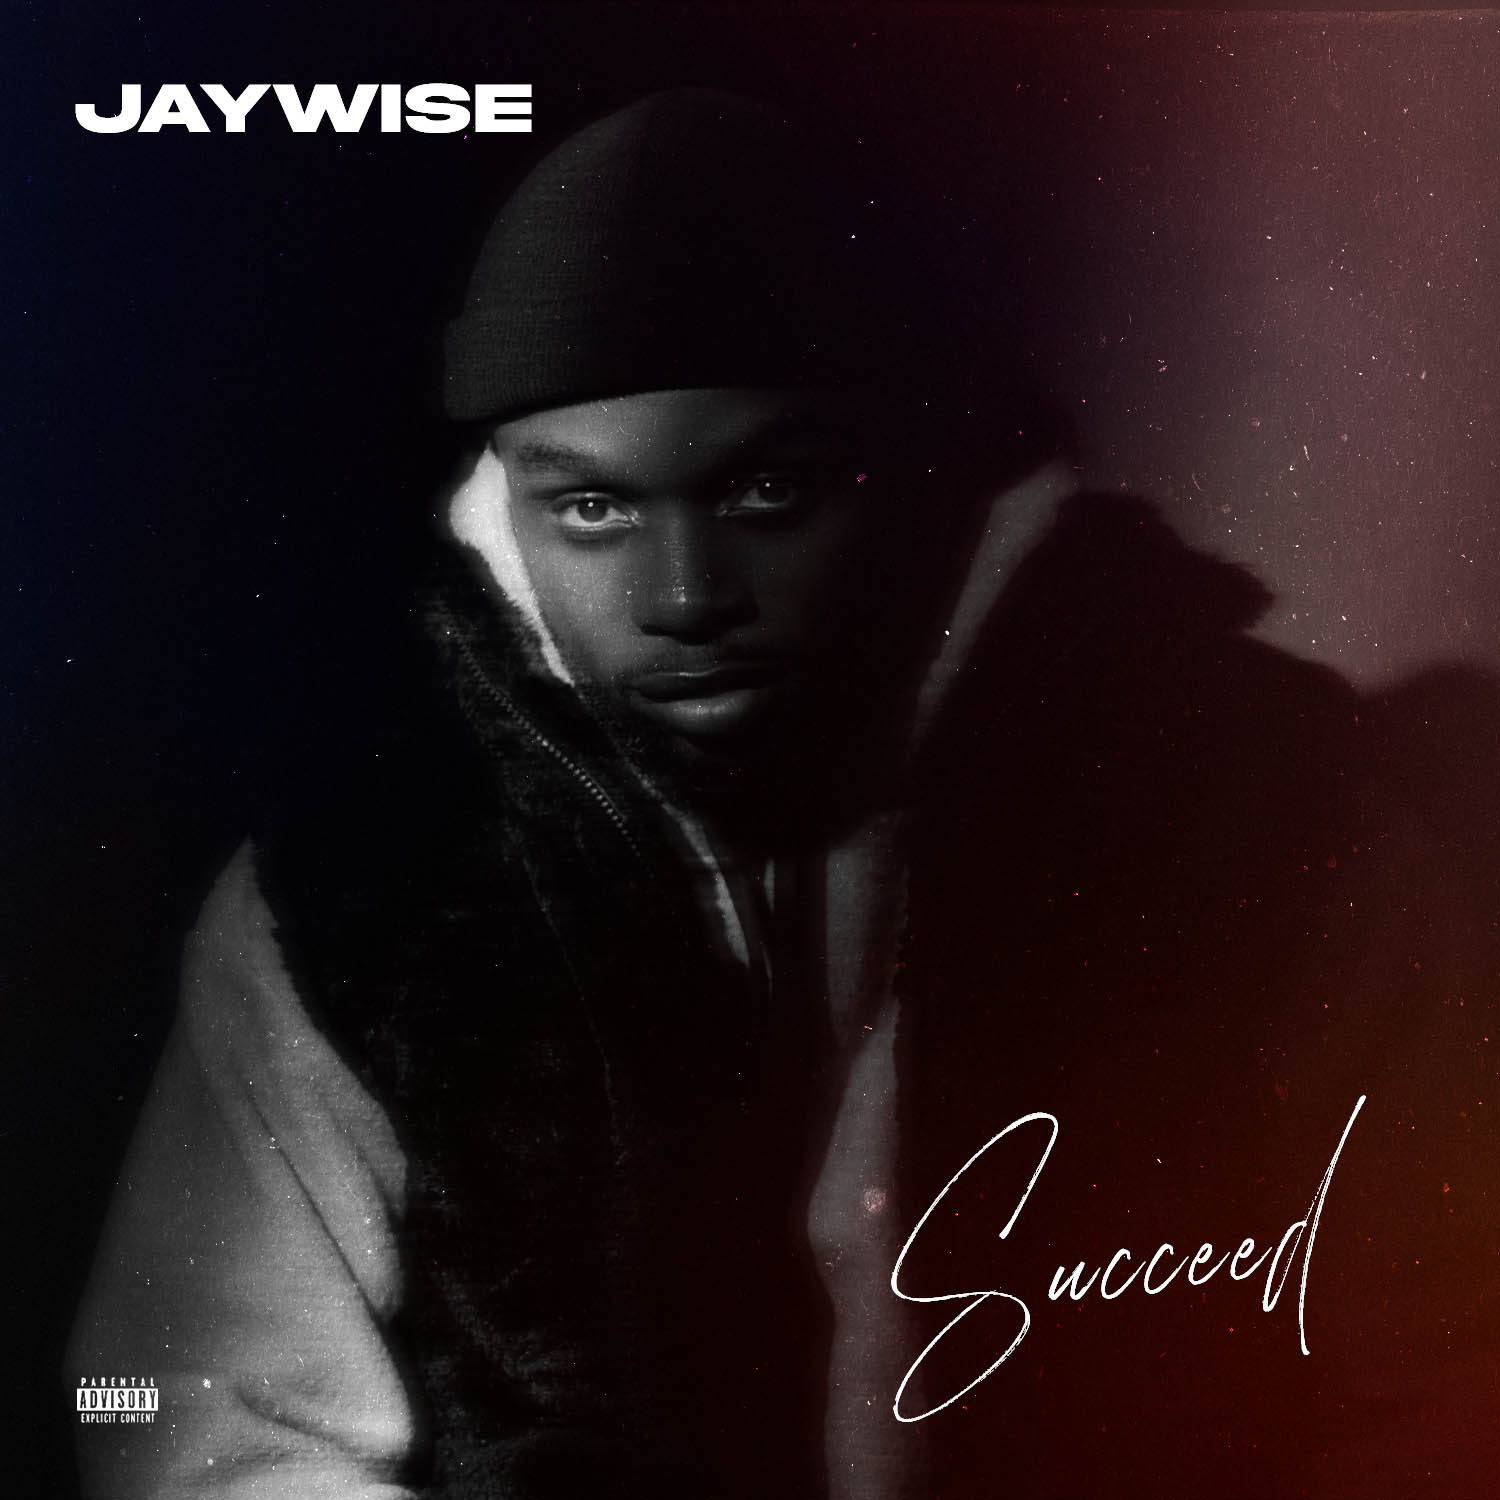 SUCCEED JAYWISE